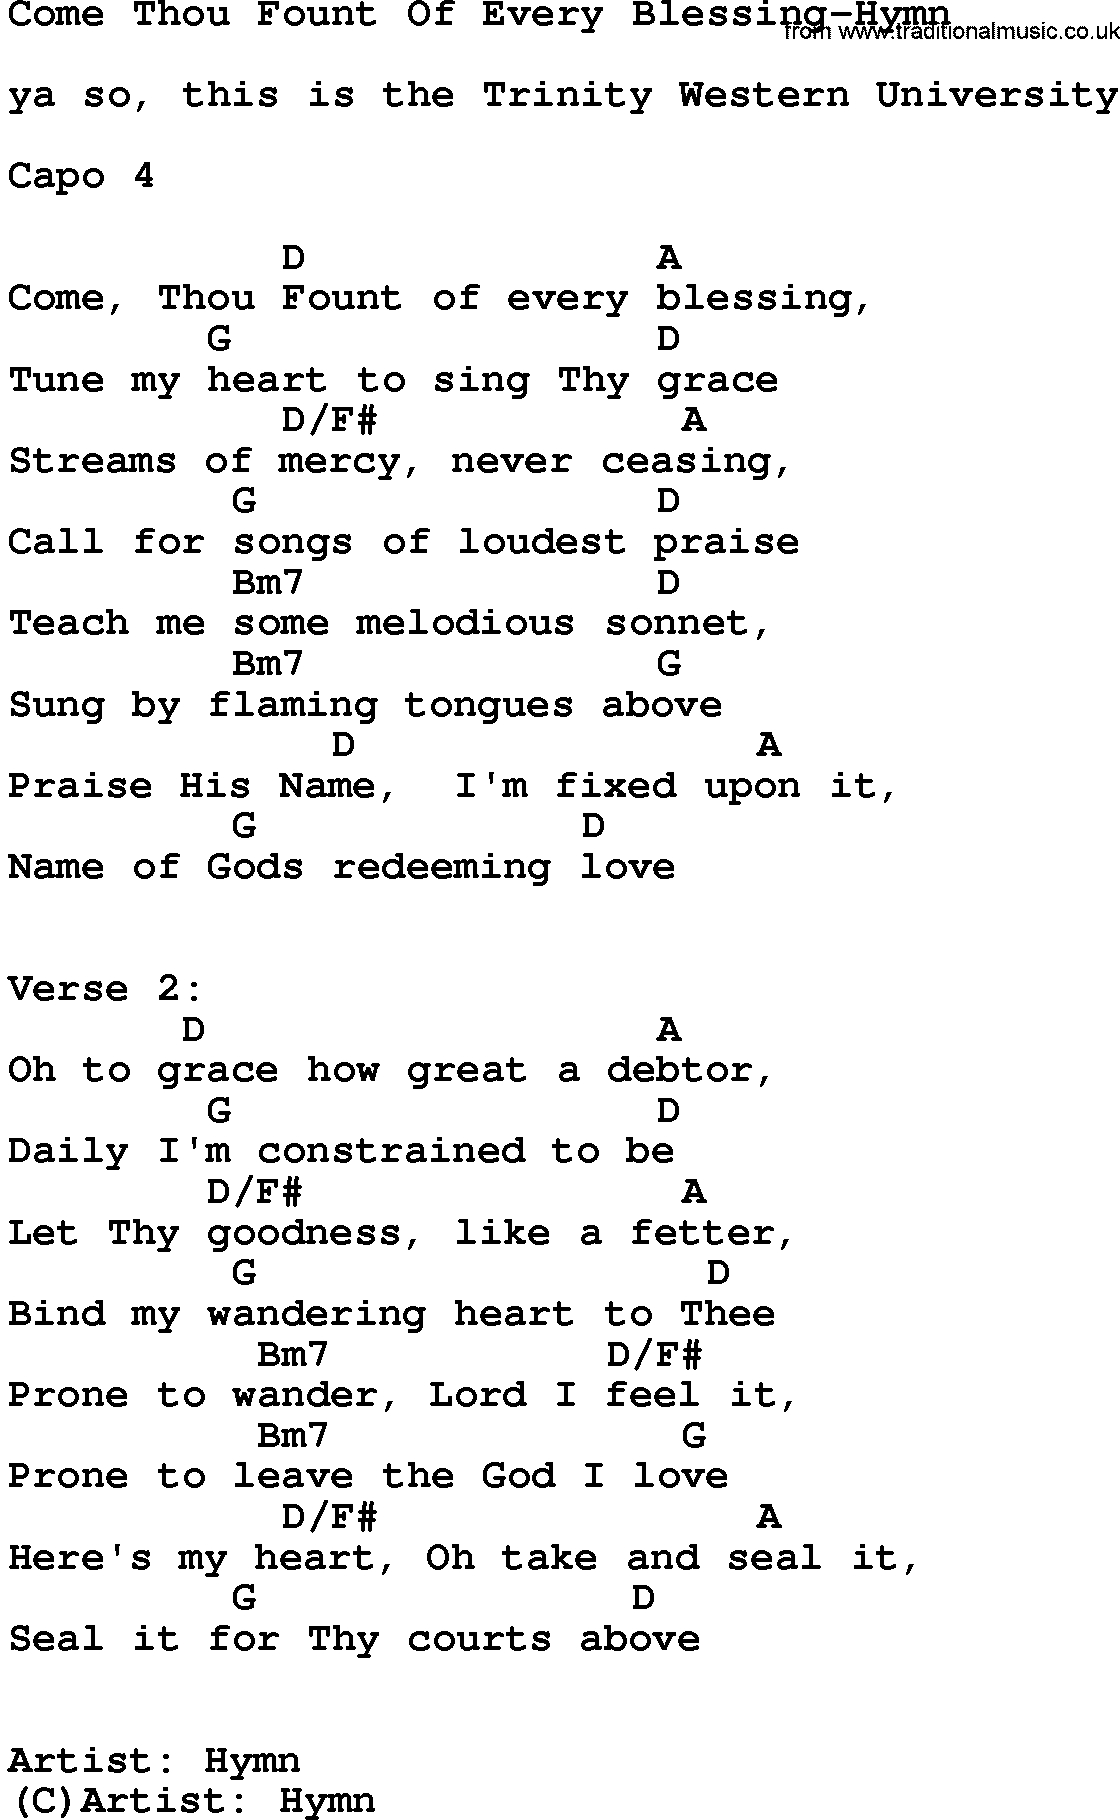 Come Thou Fount Chords Gospel Song Come Thou Fount Of Every Blessing Hymn Lyrics And Chords